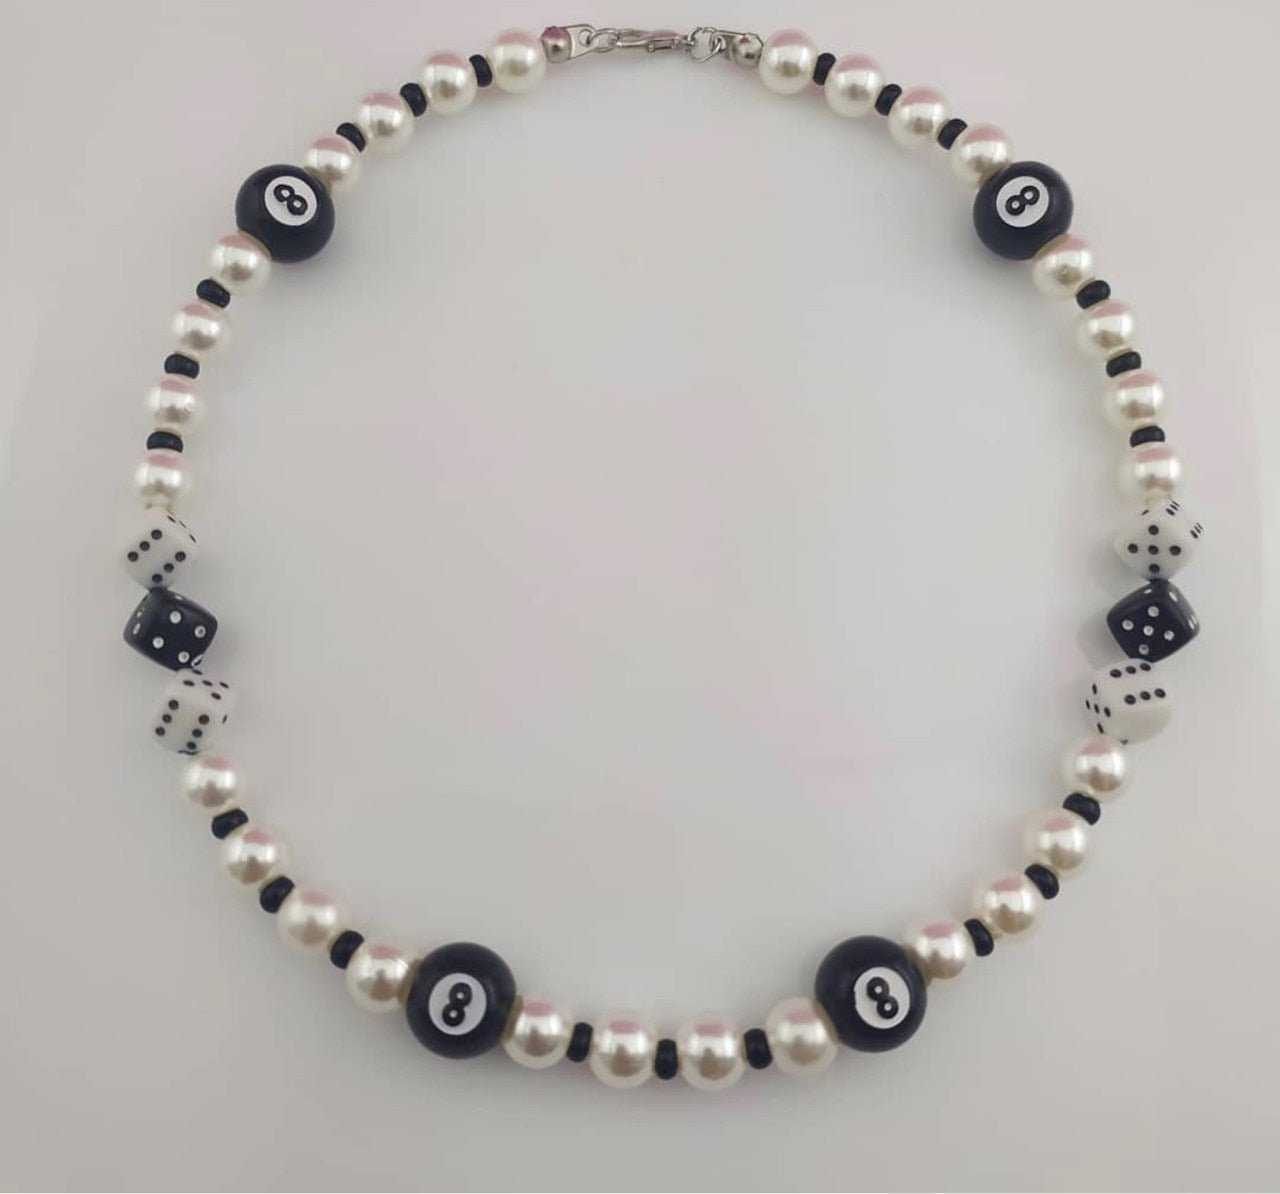 Black Number 8 Beads Necklace -